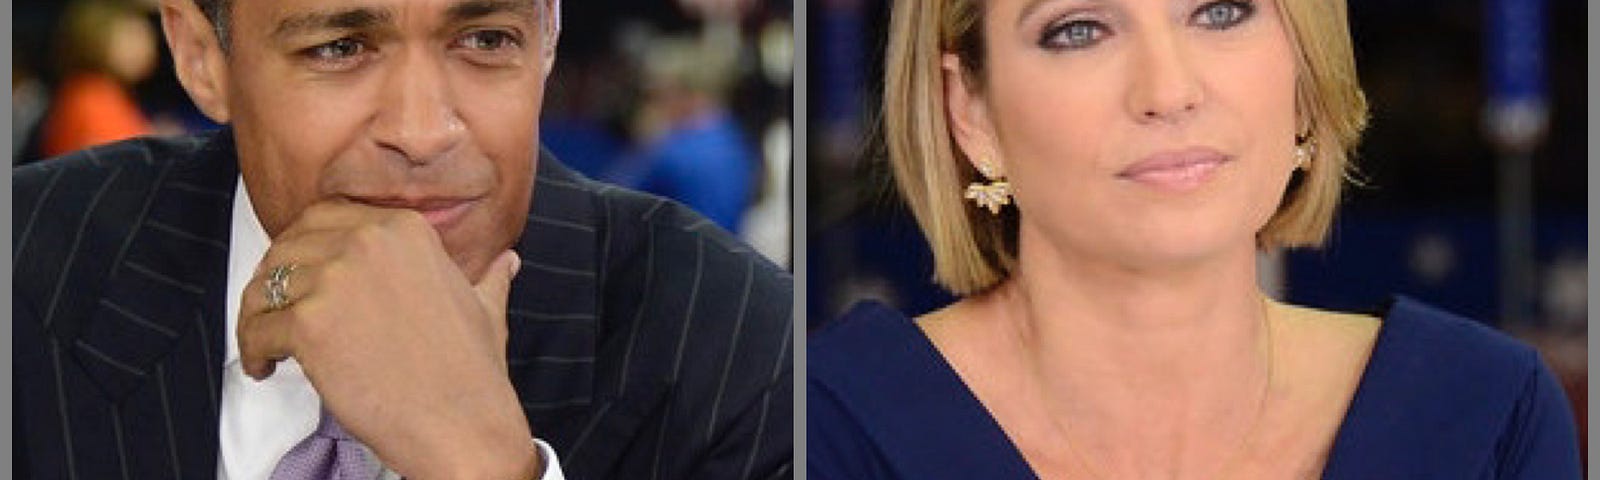 Good Morning America’s T. H. Holmes (L) with co-host Amy Robach (R) during ABC’s 2016 presidential election.